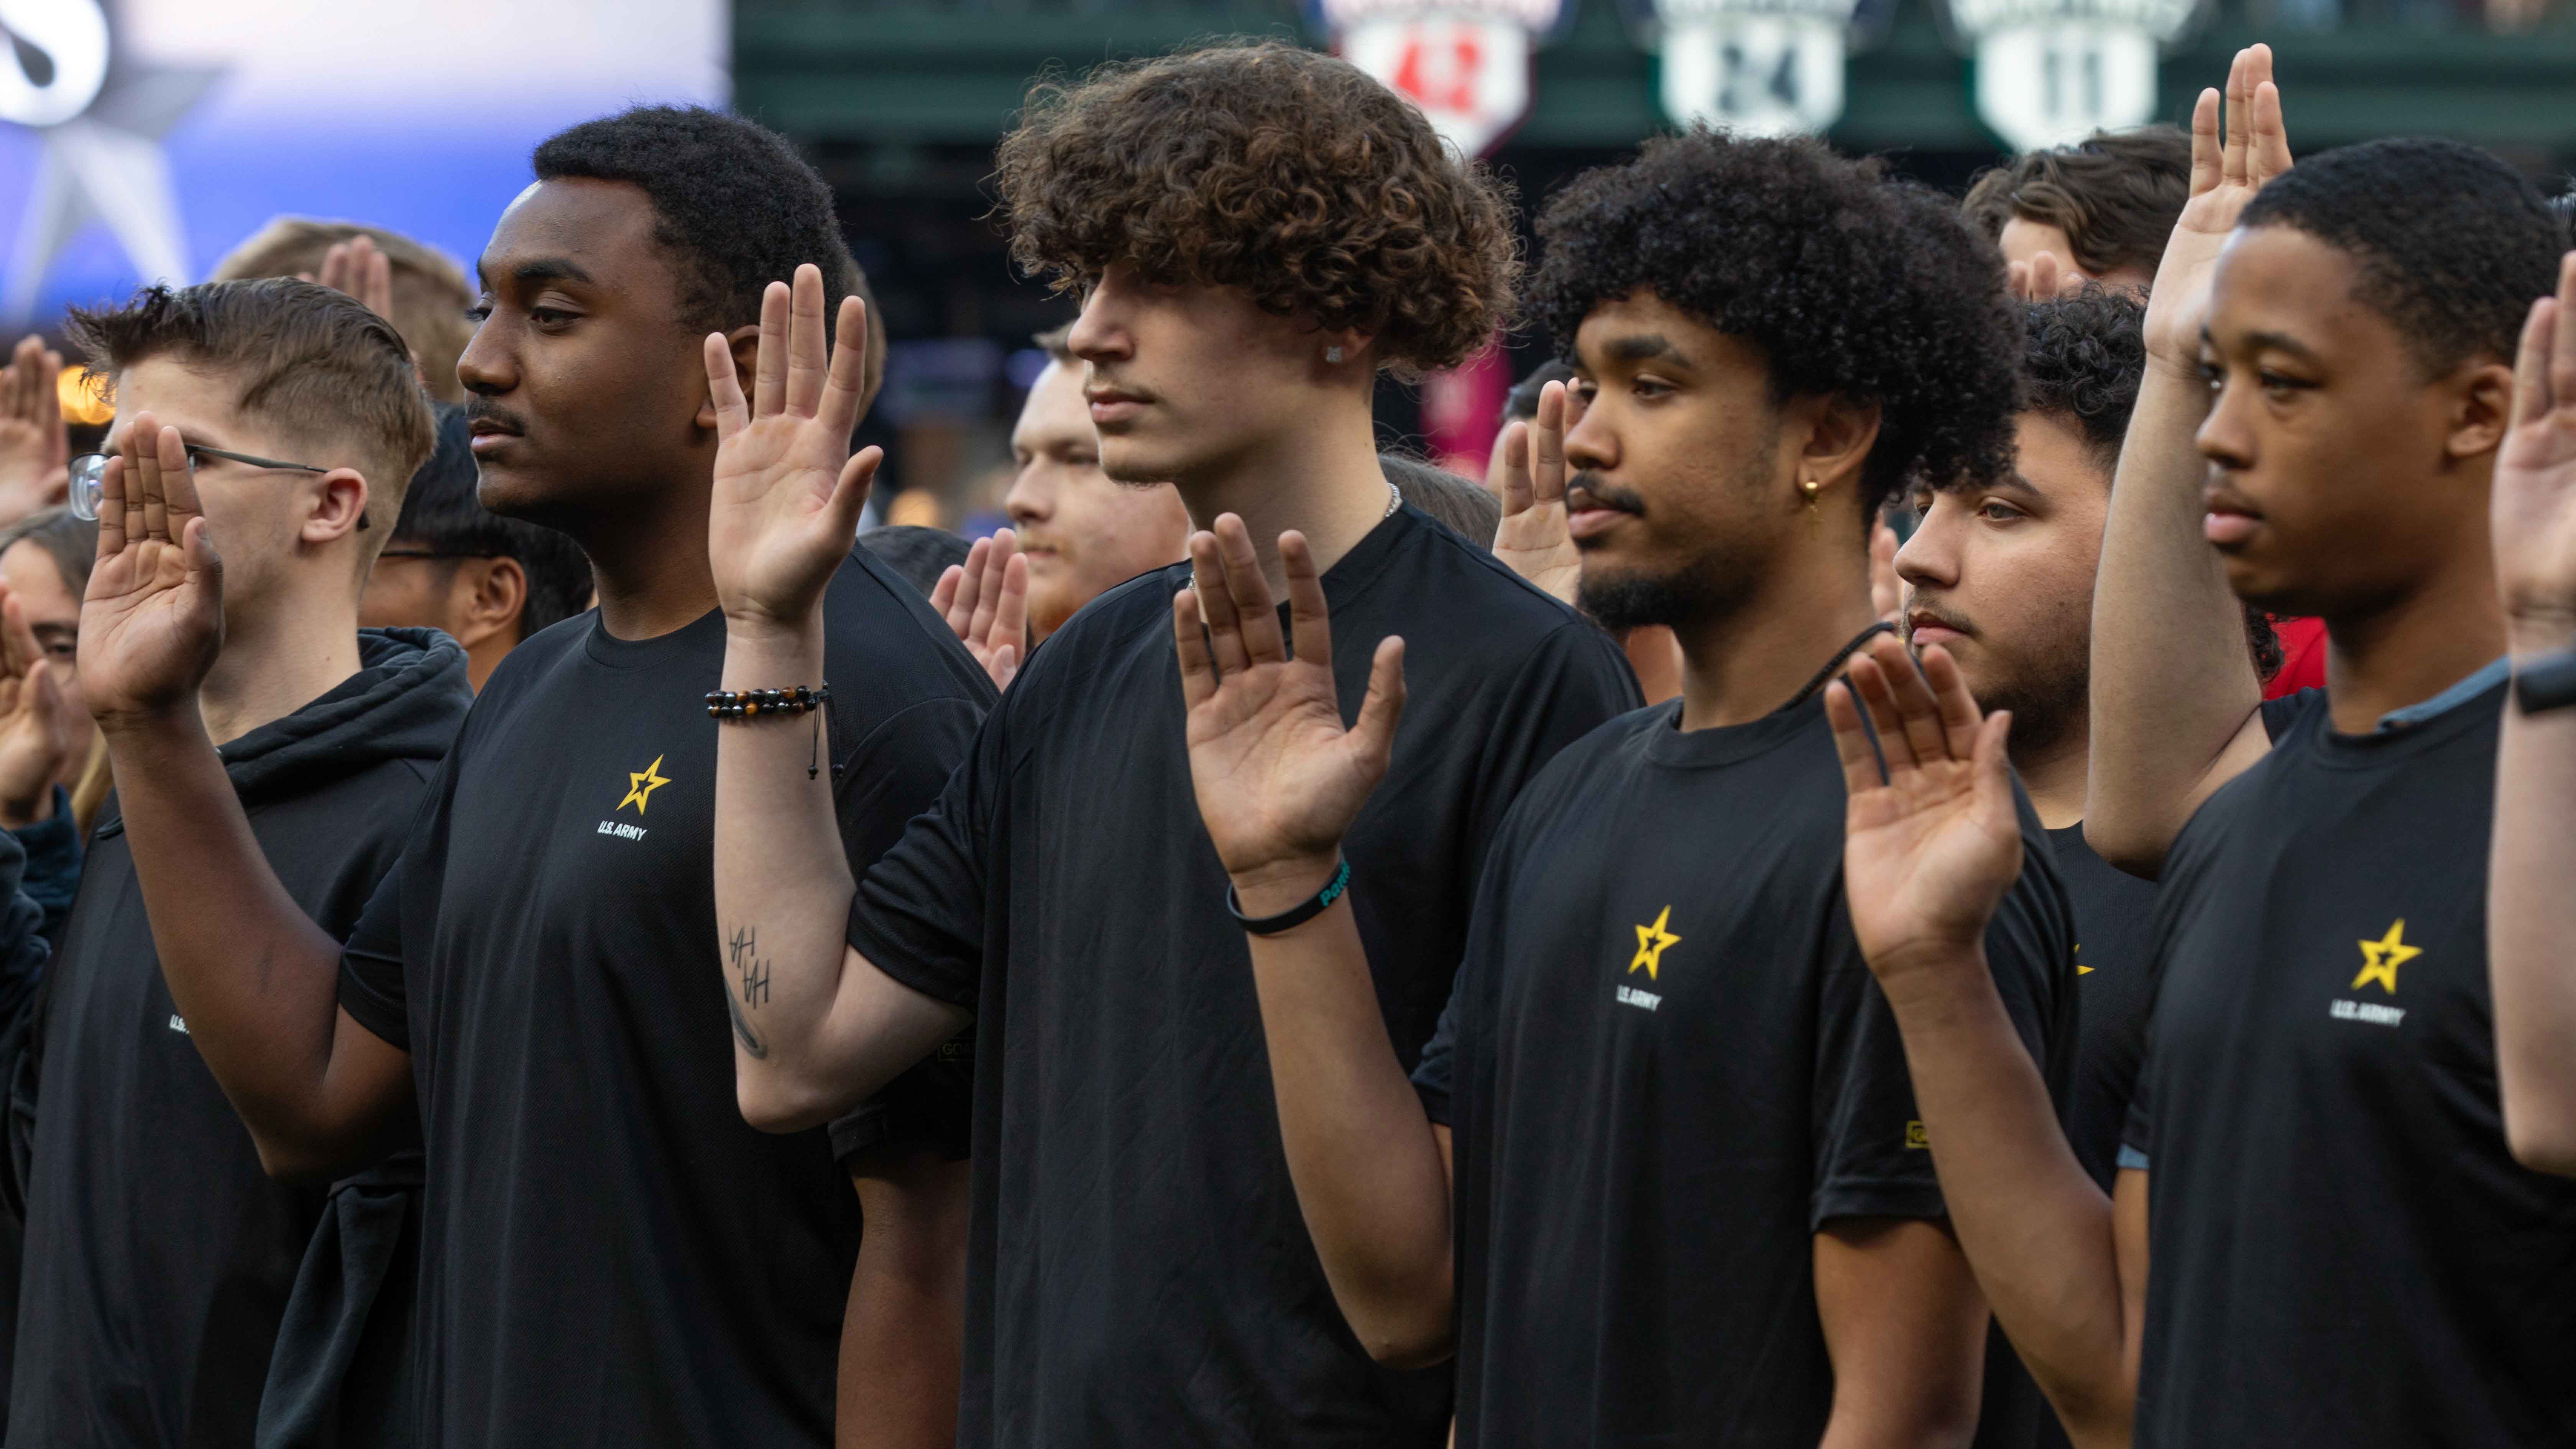 Army recruits taking oath